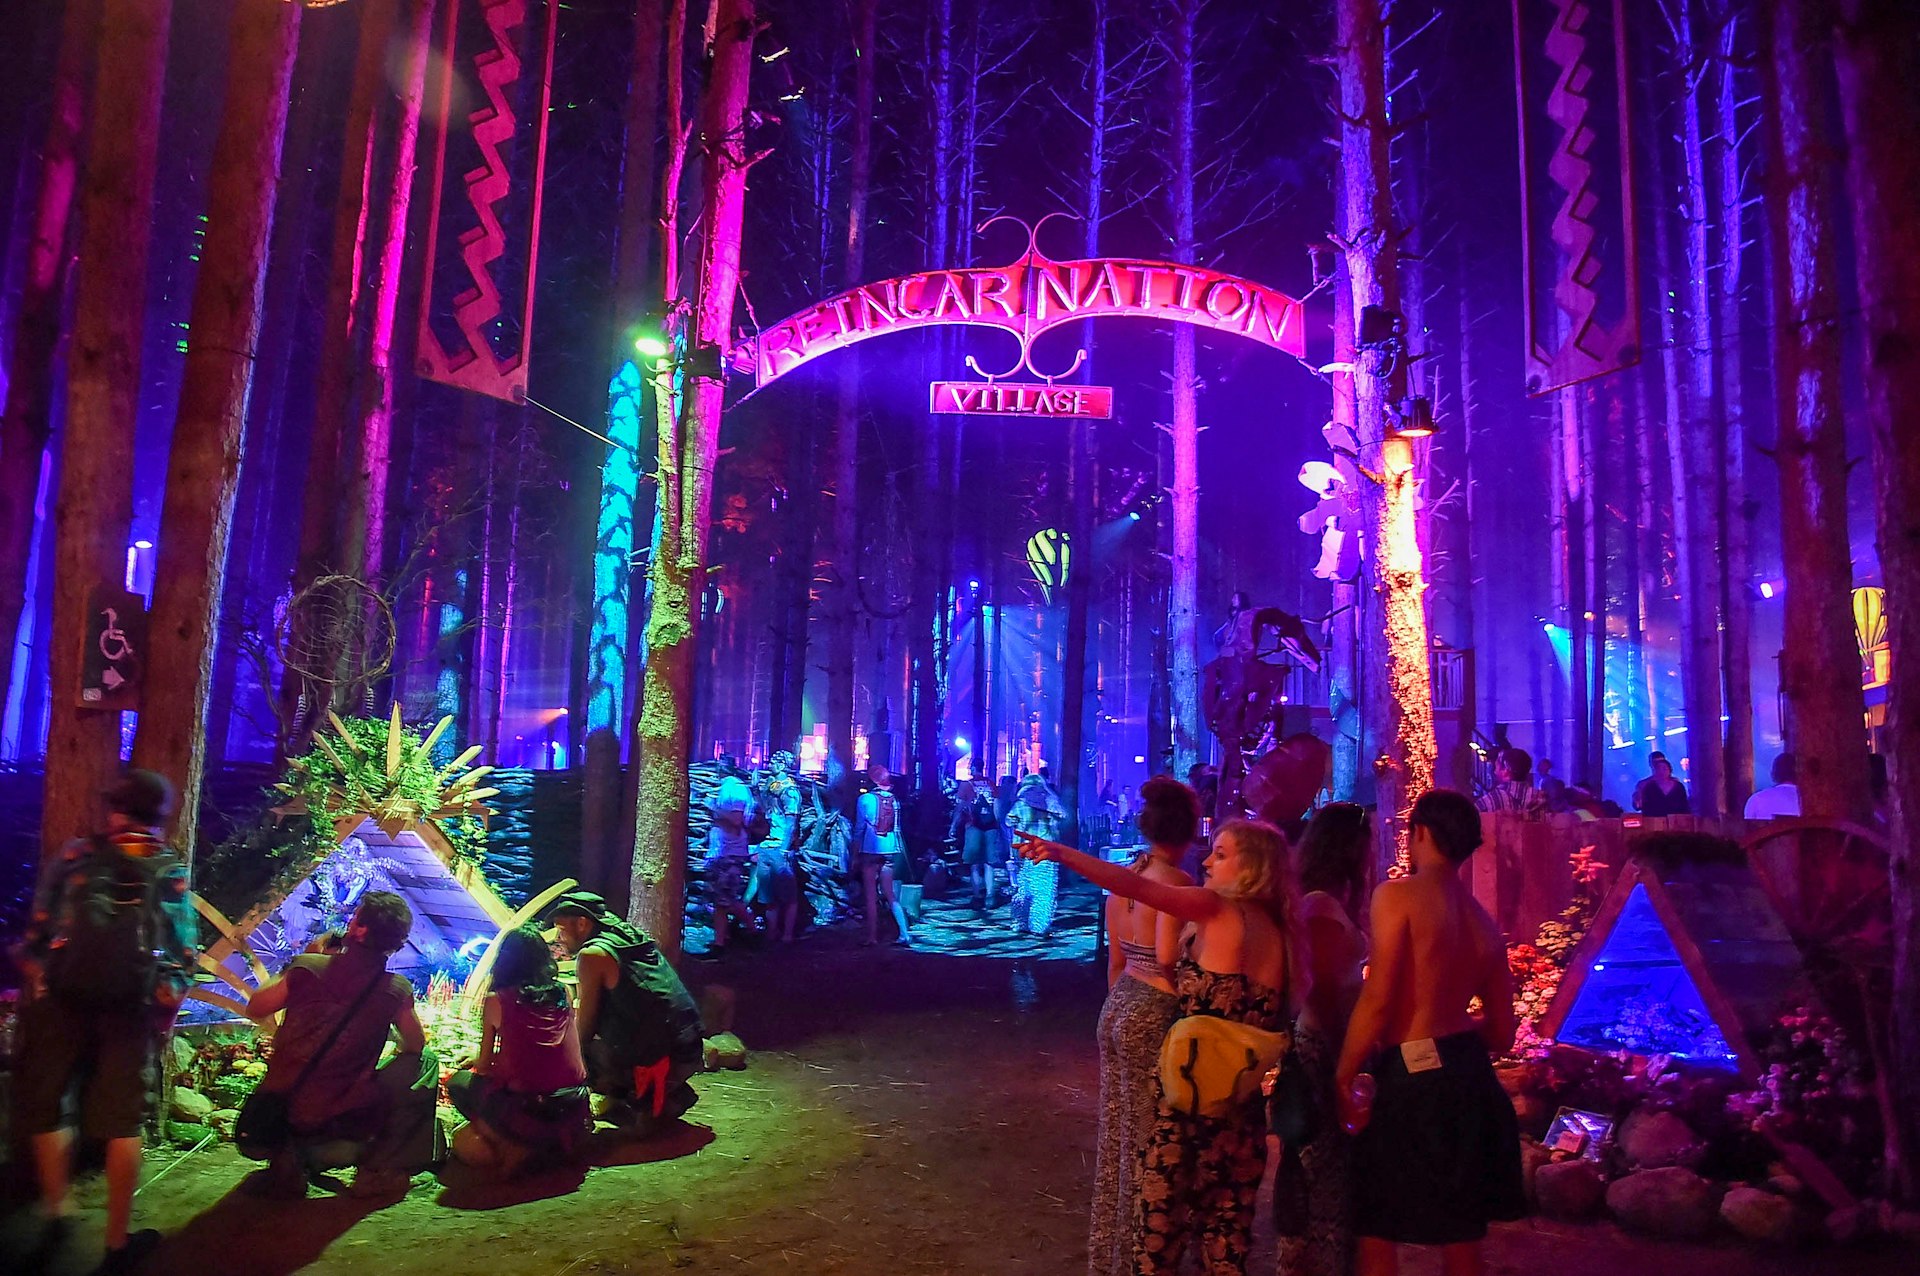 People stand beneath a sign that says Reincarnation village in a forest lit up blue, purple and pink